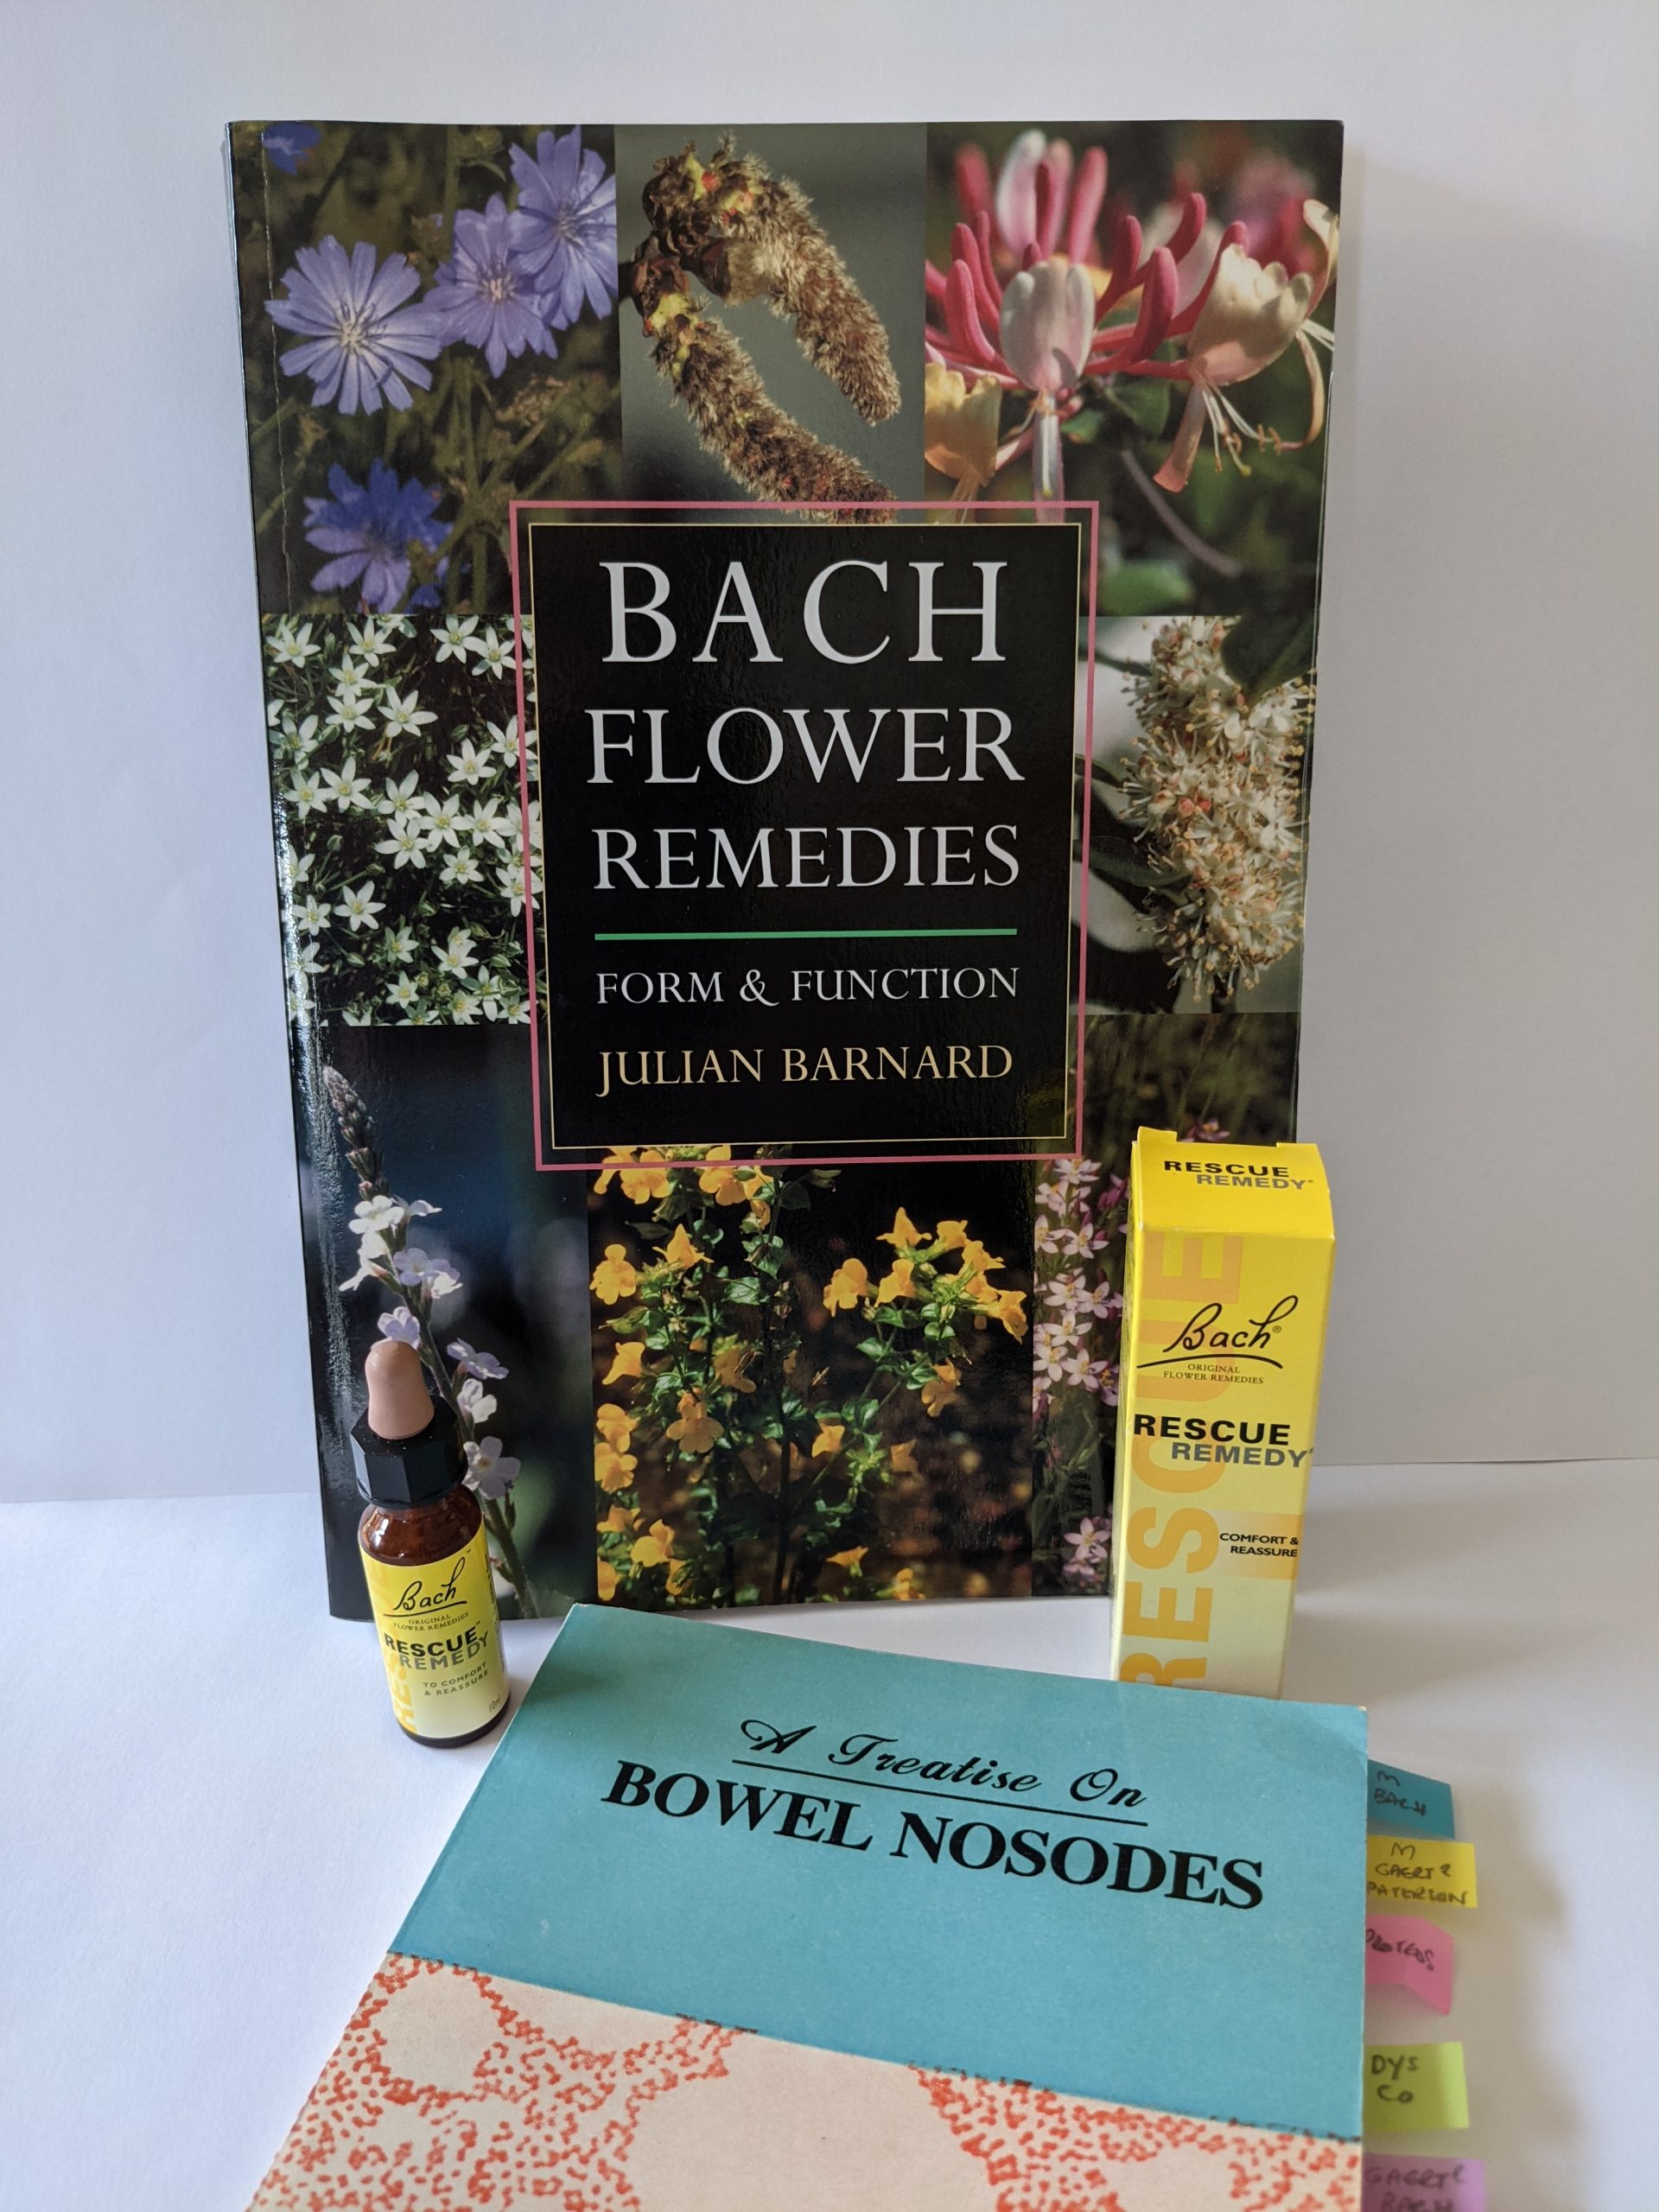 The Bowel Nosodes and Flower Essences - areas of research for Dr Bach